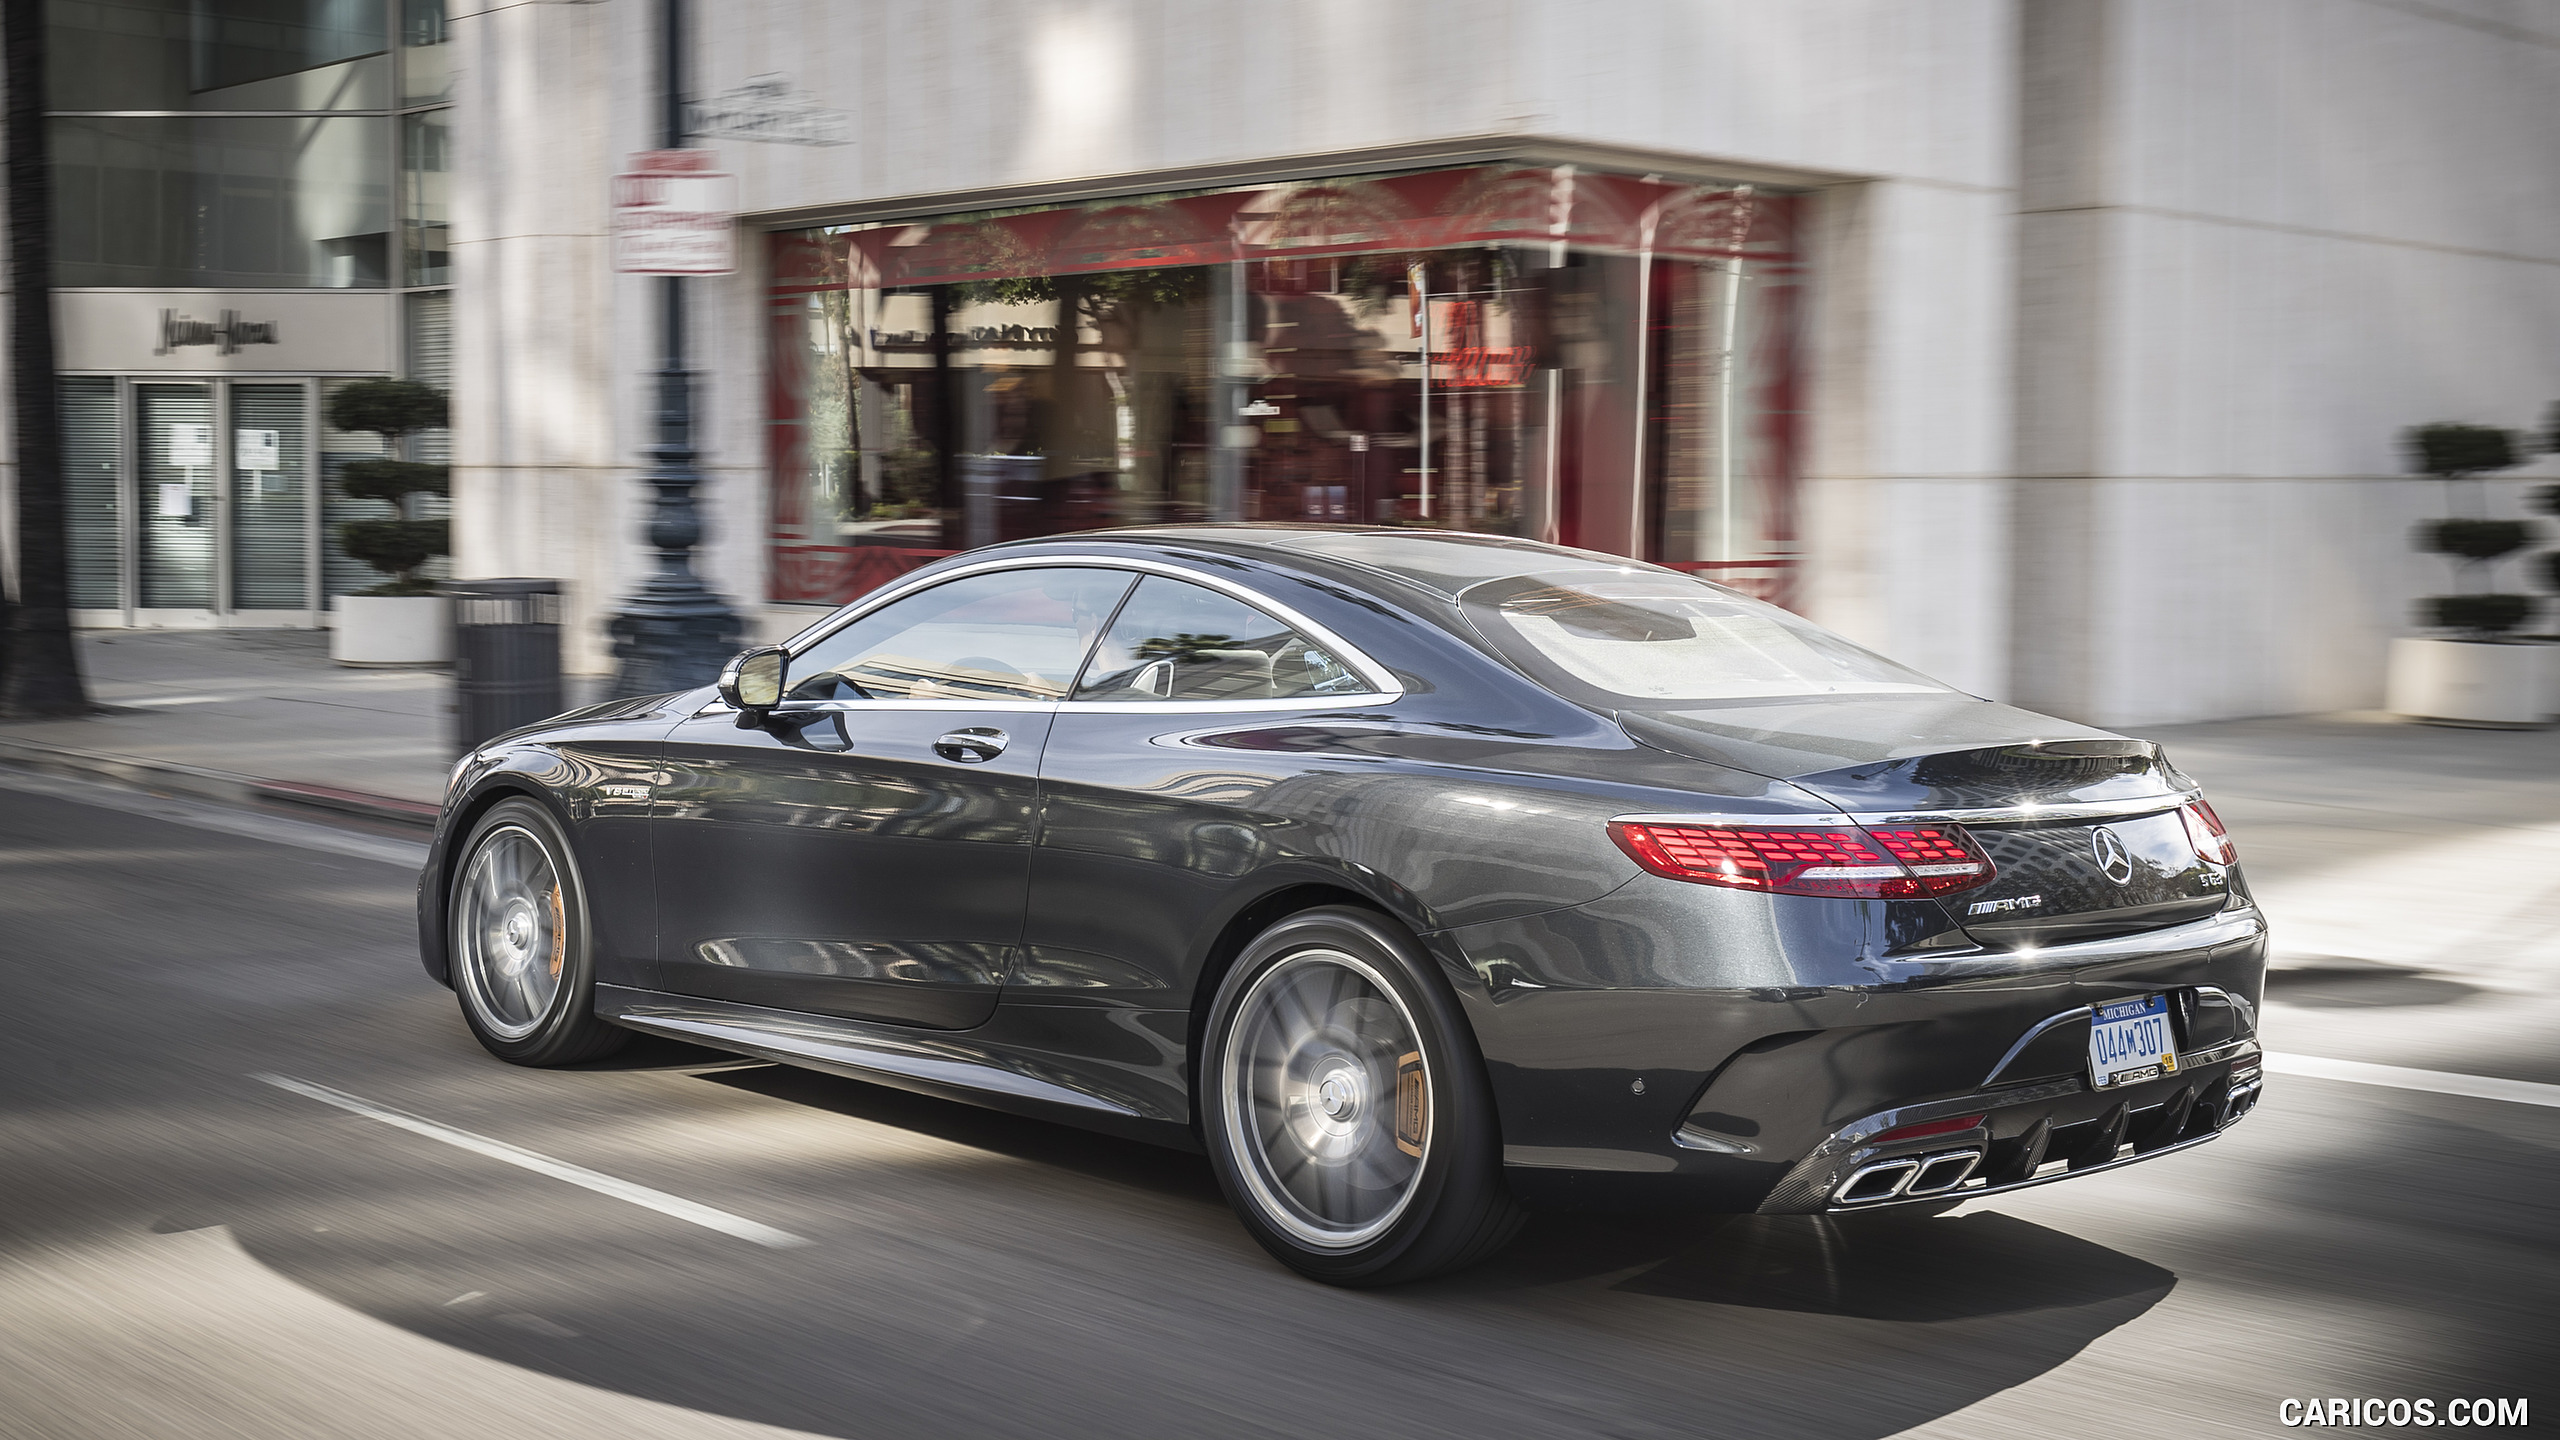 2018 Mercedes-AMG S63 Coupe (US-Spec) - Rear Three-Quarter, #48 of 98